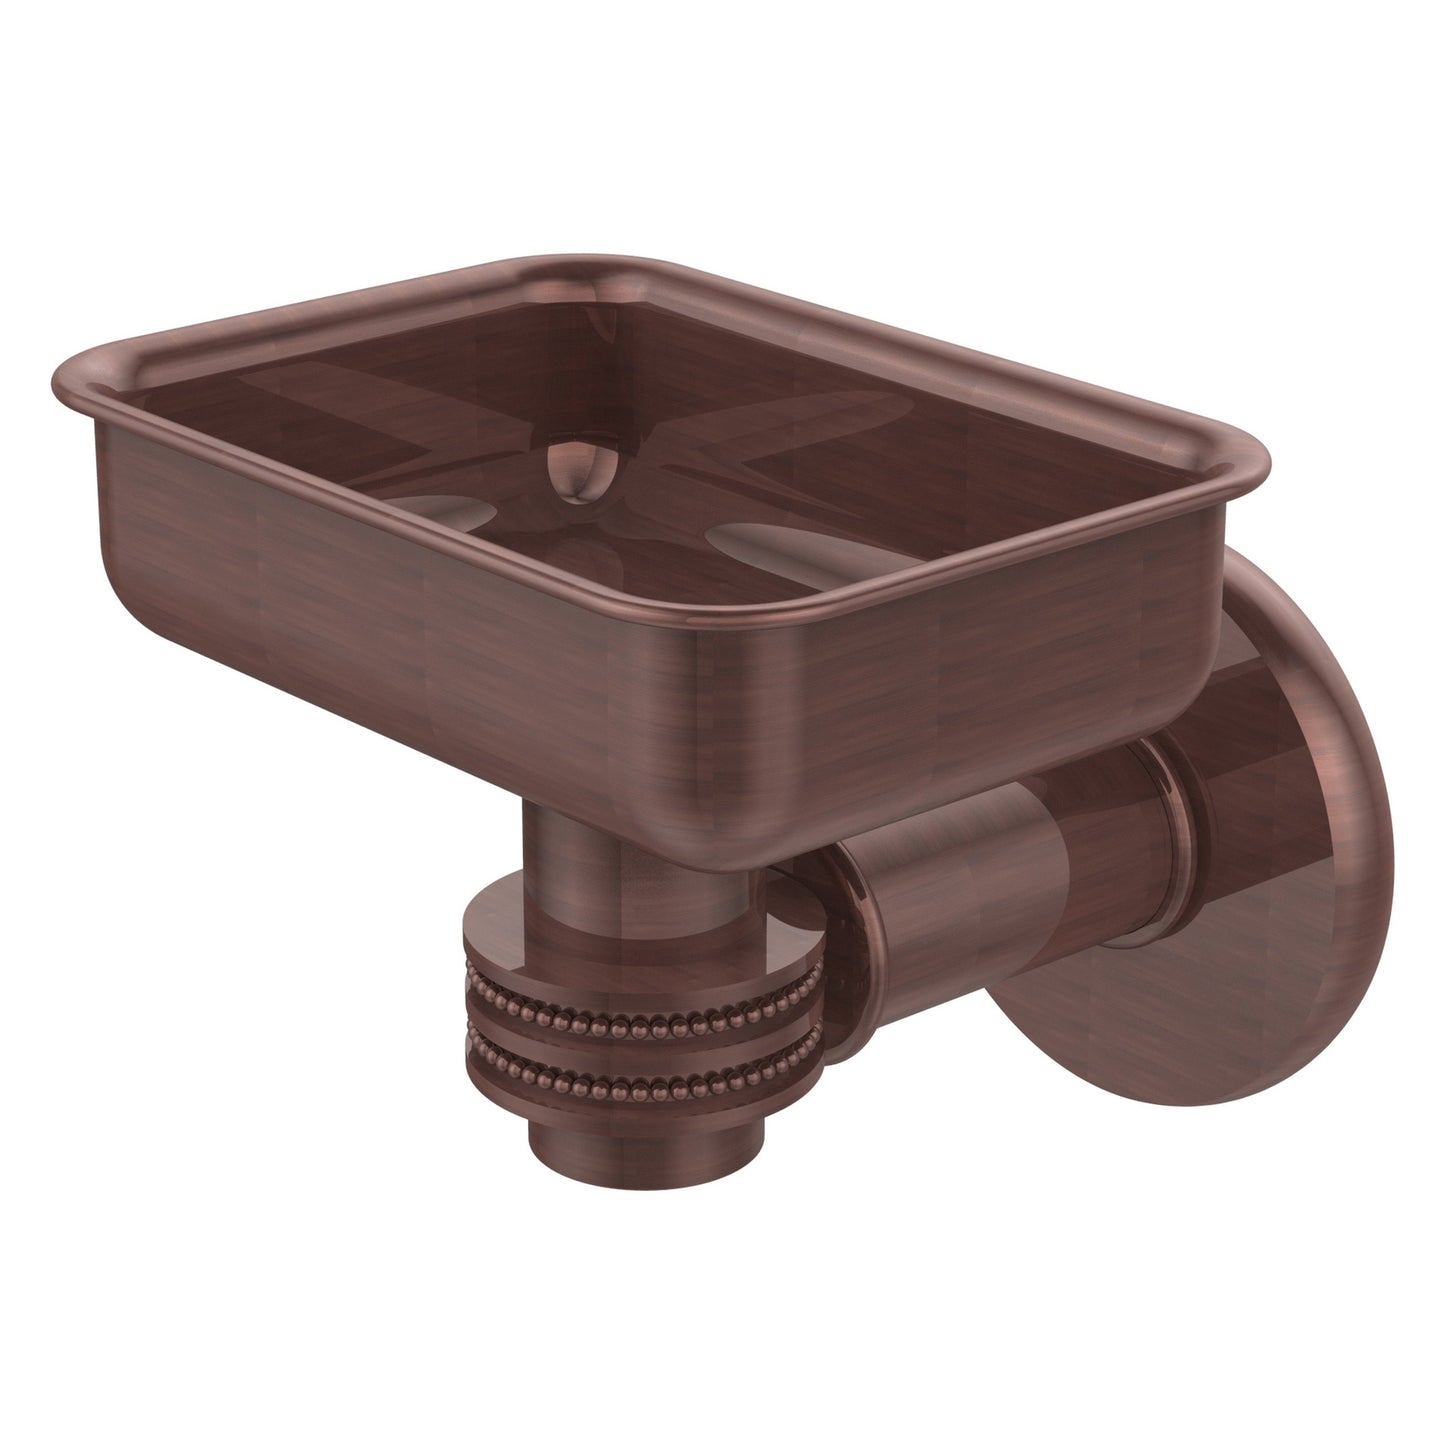 Allied Brass Continental 4.5" x 3.5" Antique Copper Solid Brass Wall-Mounted Soap Dish Holder with Dotted Accents